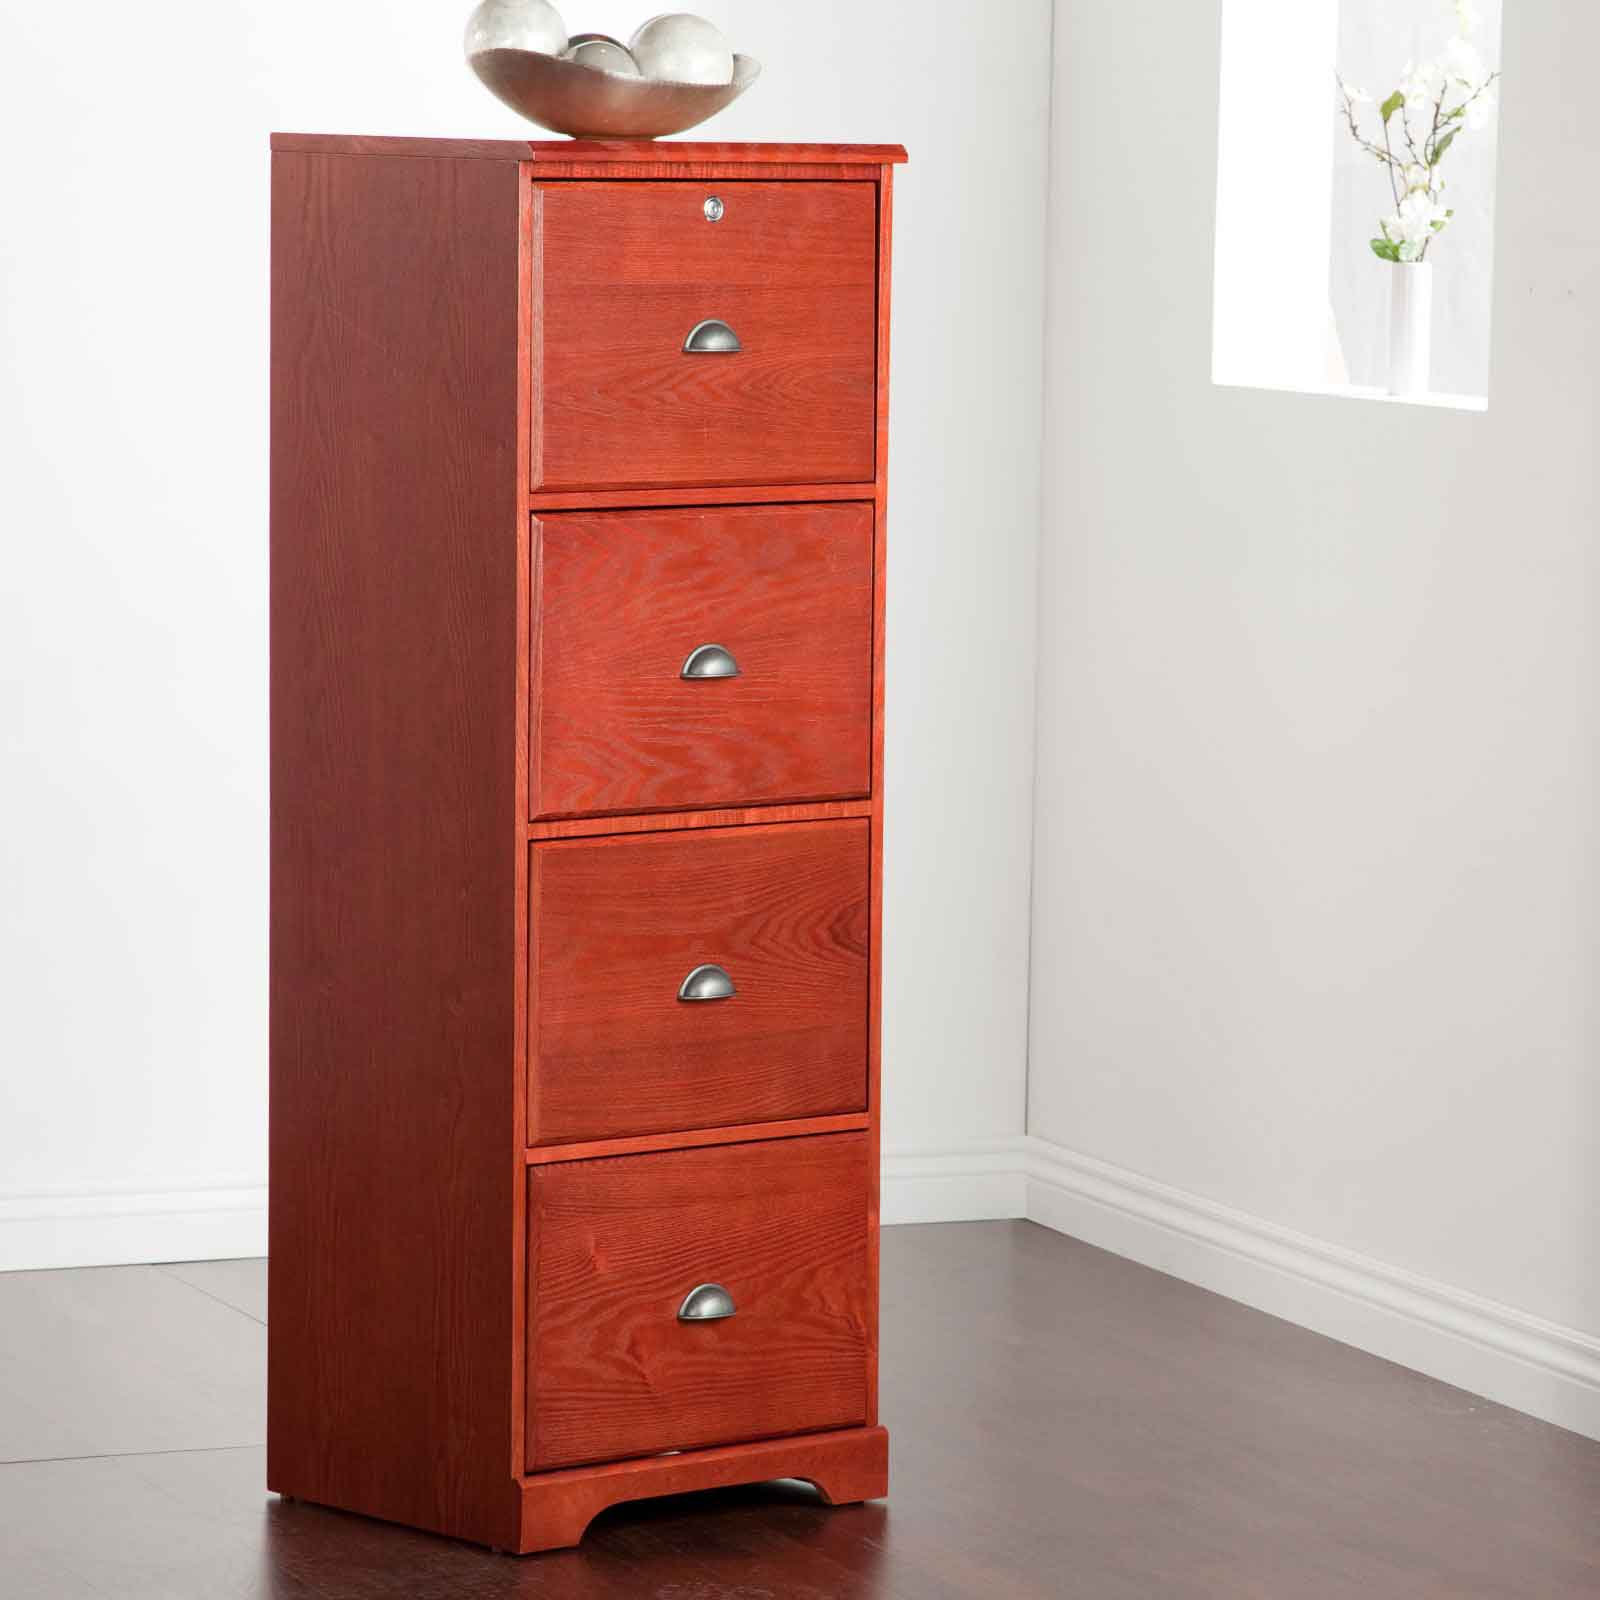 Decorative Filing Cabinets For Both Style And Function Homesfeed pertaining to measurements 1600 X 1600